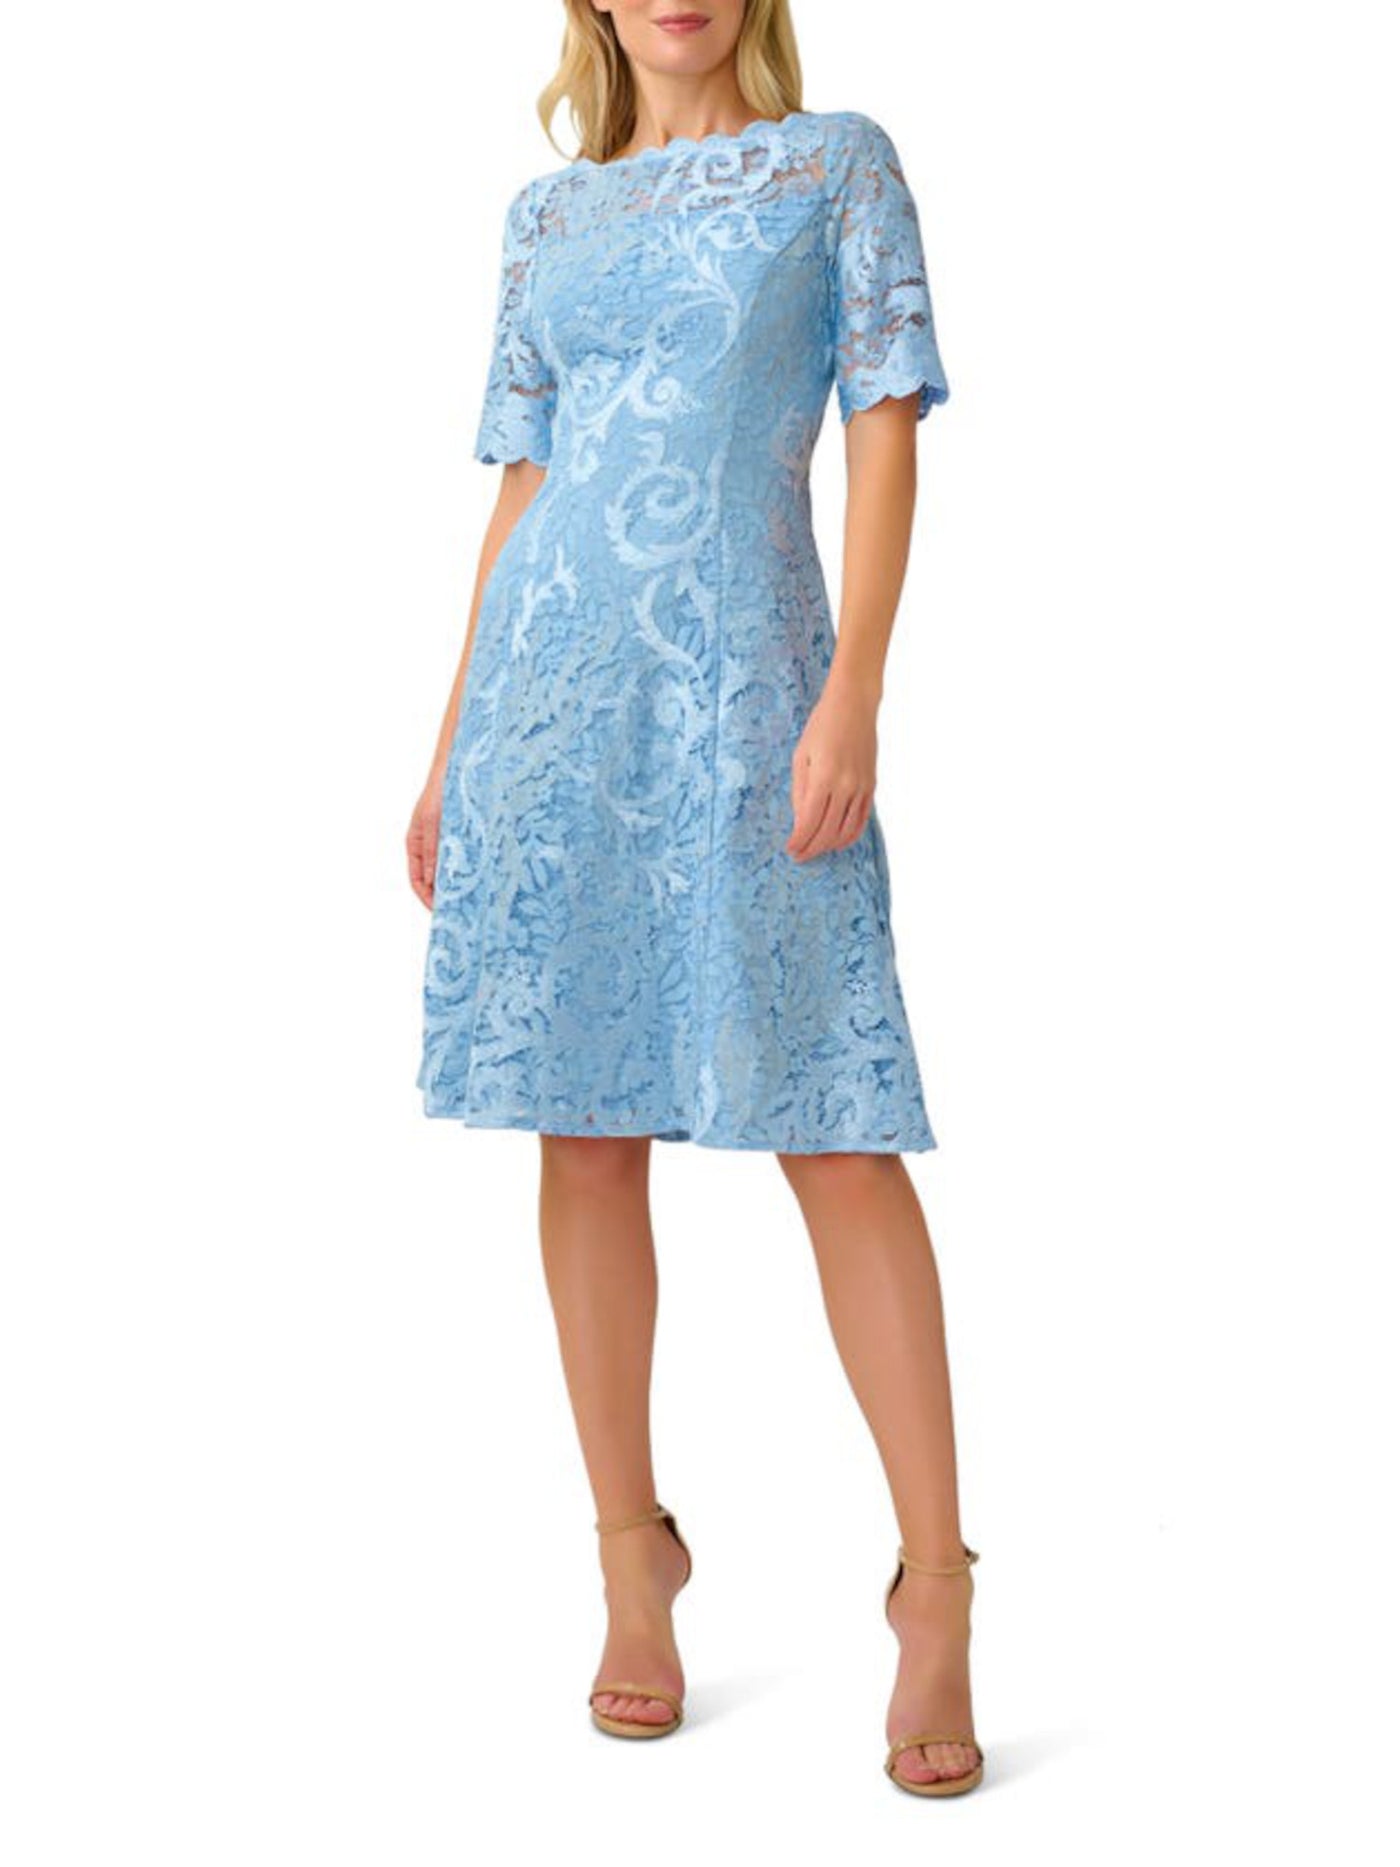 ADRIANNA PAPELL Womens Light Blue Scalloped Lace Zippered Lined Floral Short Sleeve Boat Neck Above The Knee Wear To Work Fit + Flare Dress 6